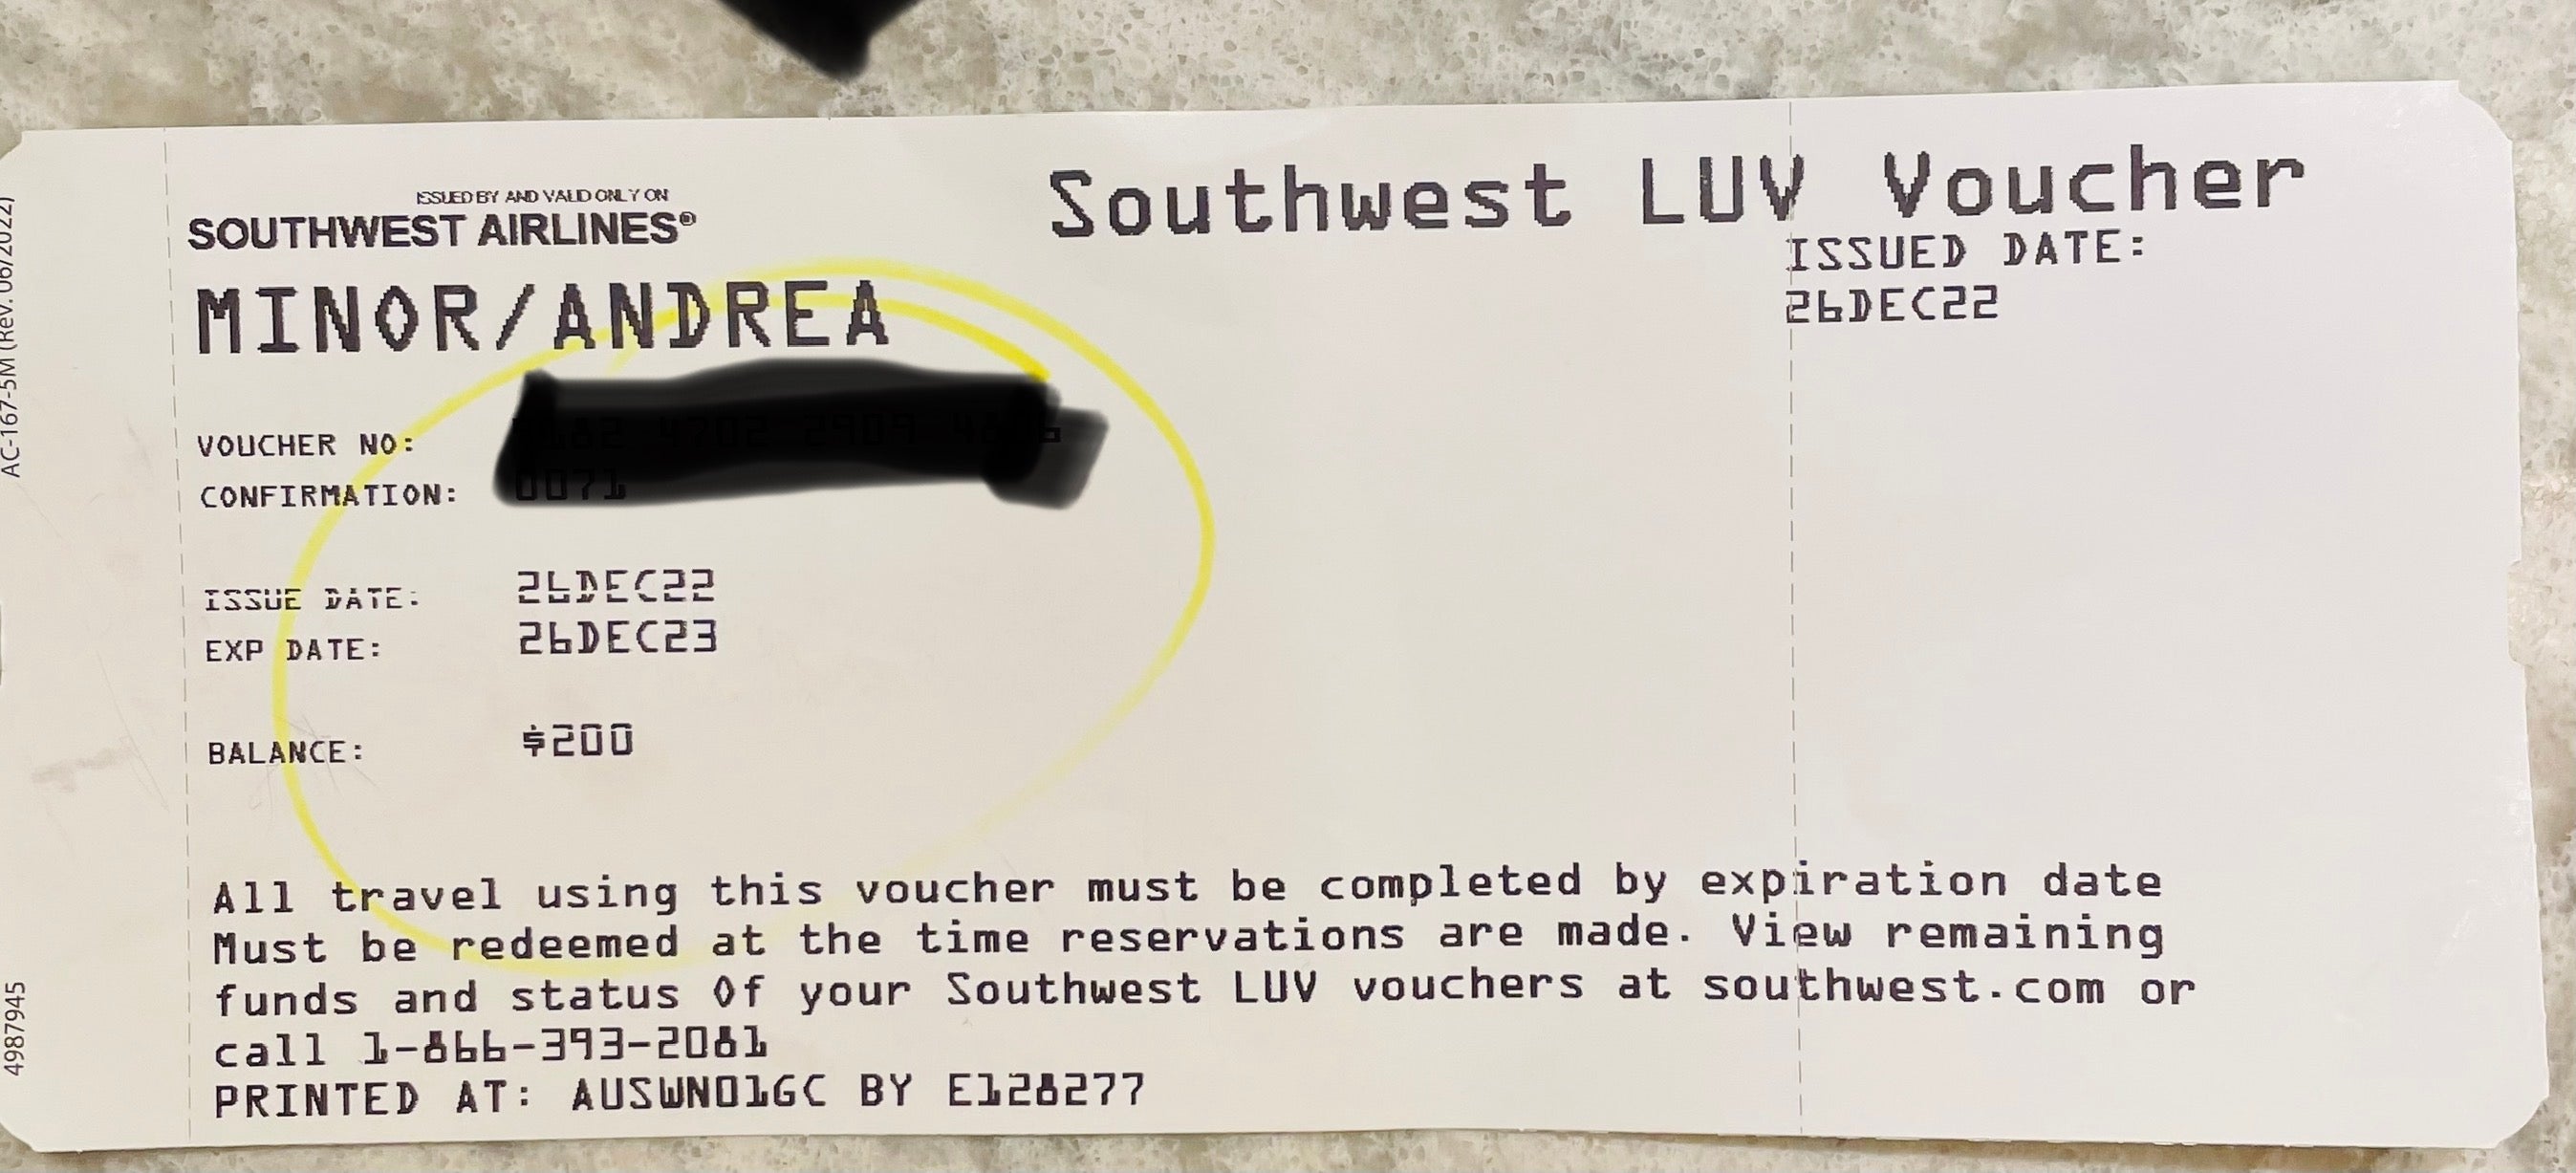 A rectangular piece of paper in the shape of an airline ticket. At the top it says "Southwest LUV Voucher." The balance is shown as $200. 